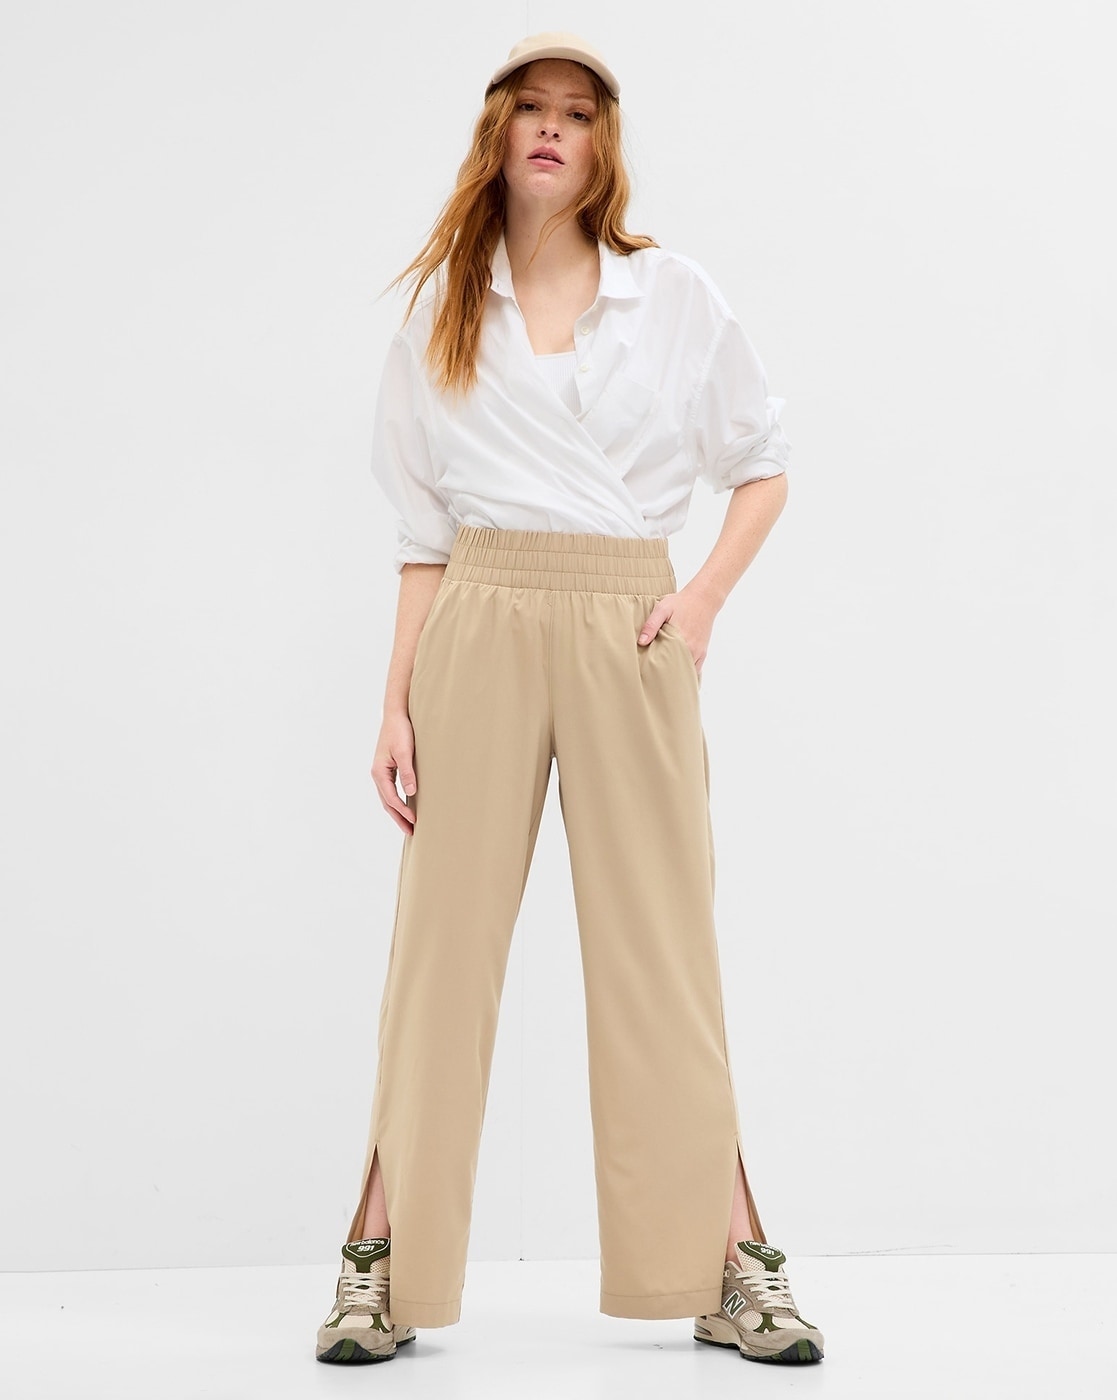 Simply Vera Wang Womens Straight Leg Ankle Pants Low Rise Beige